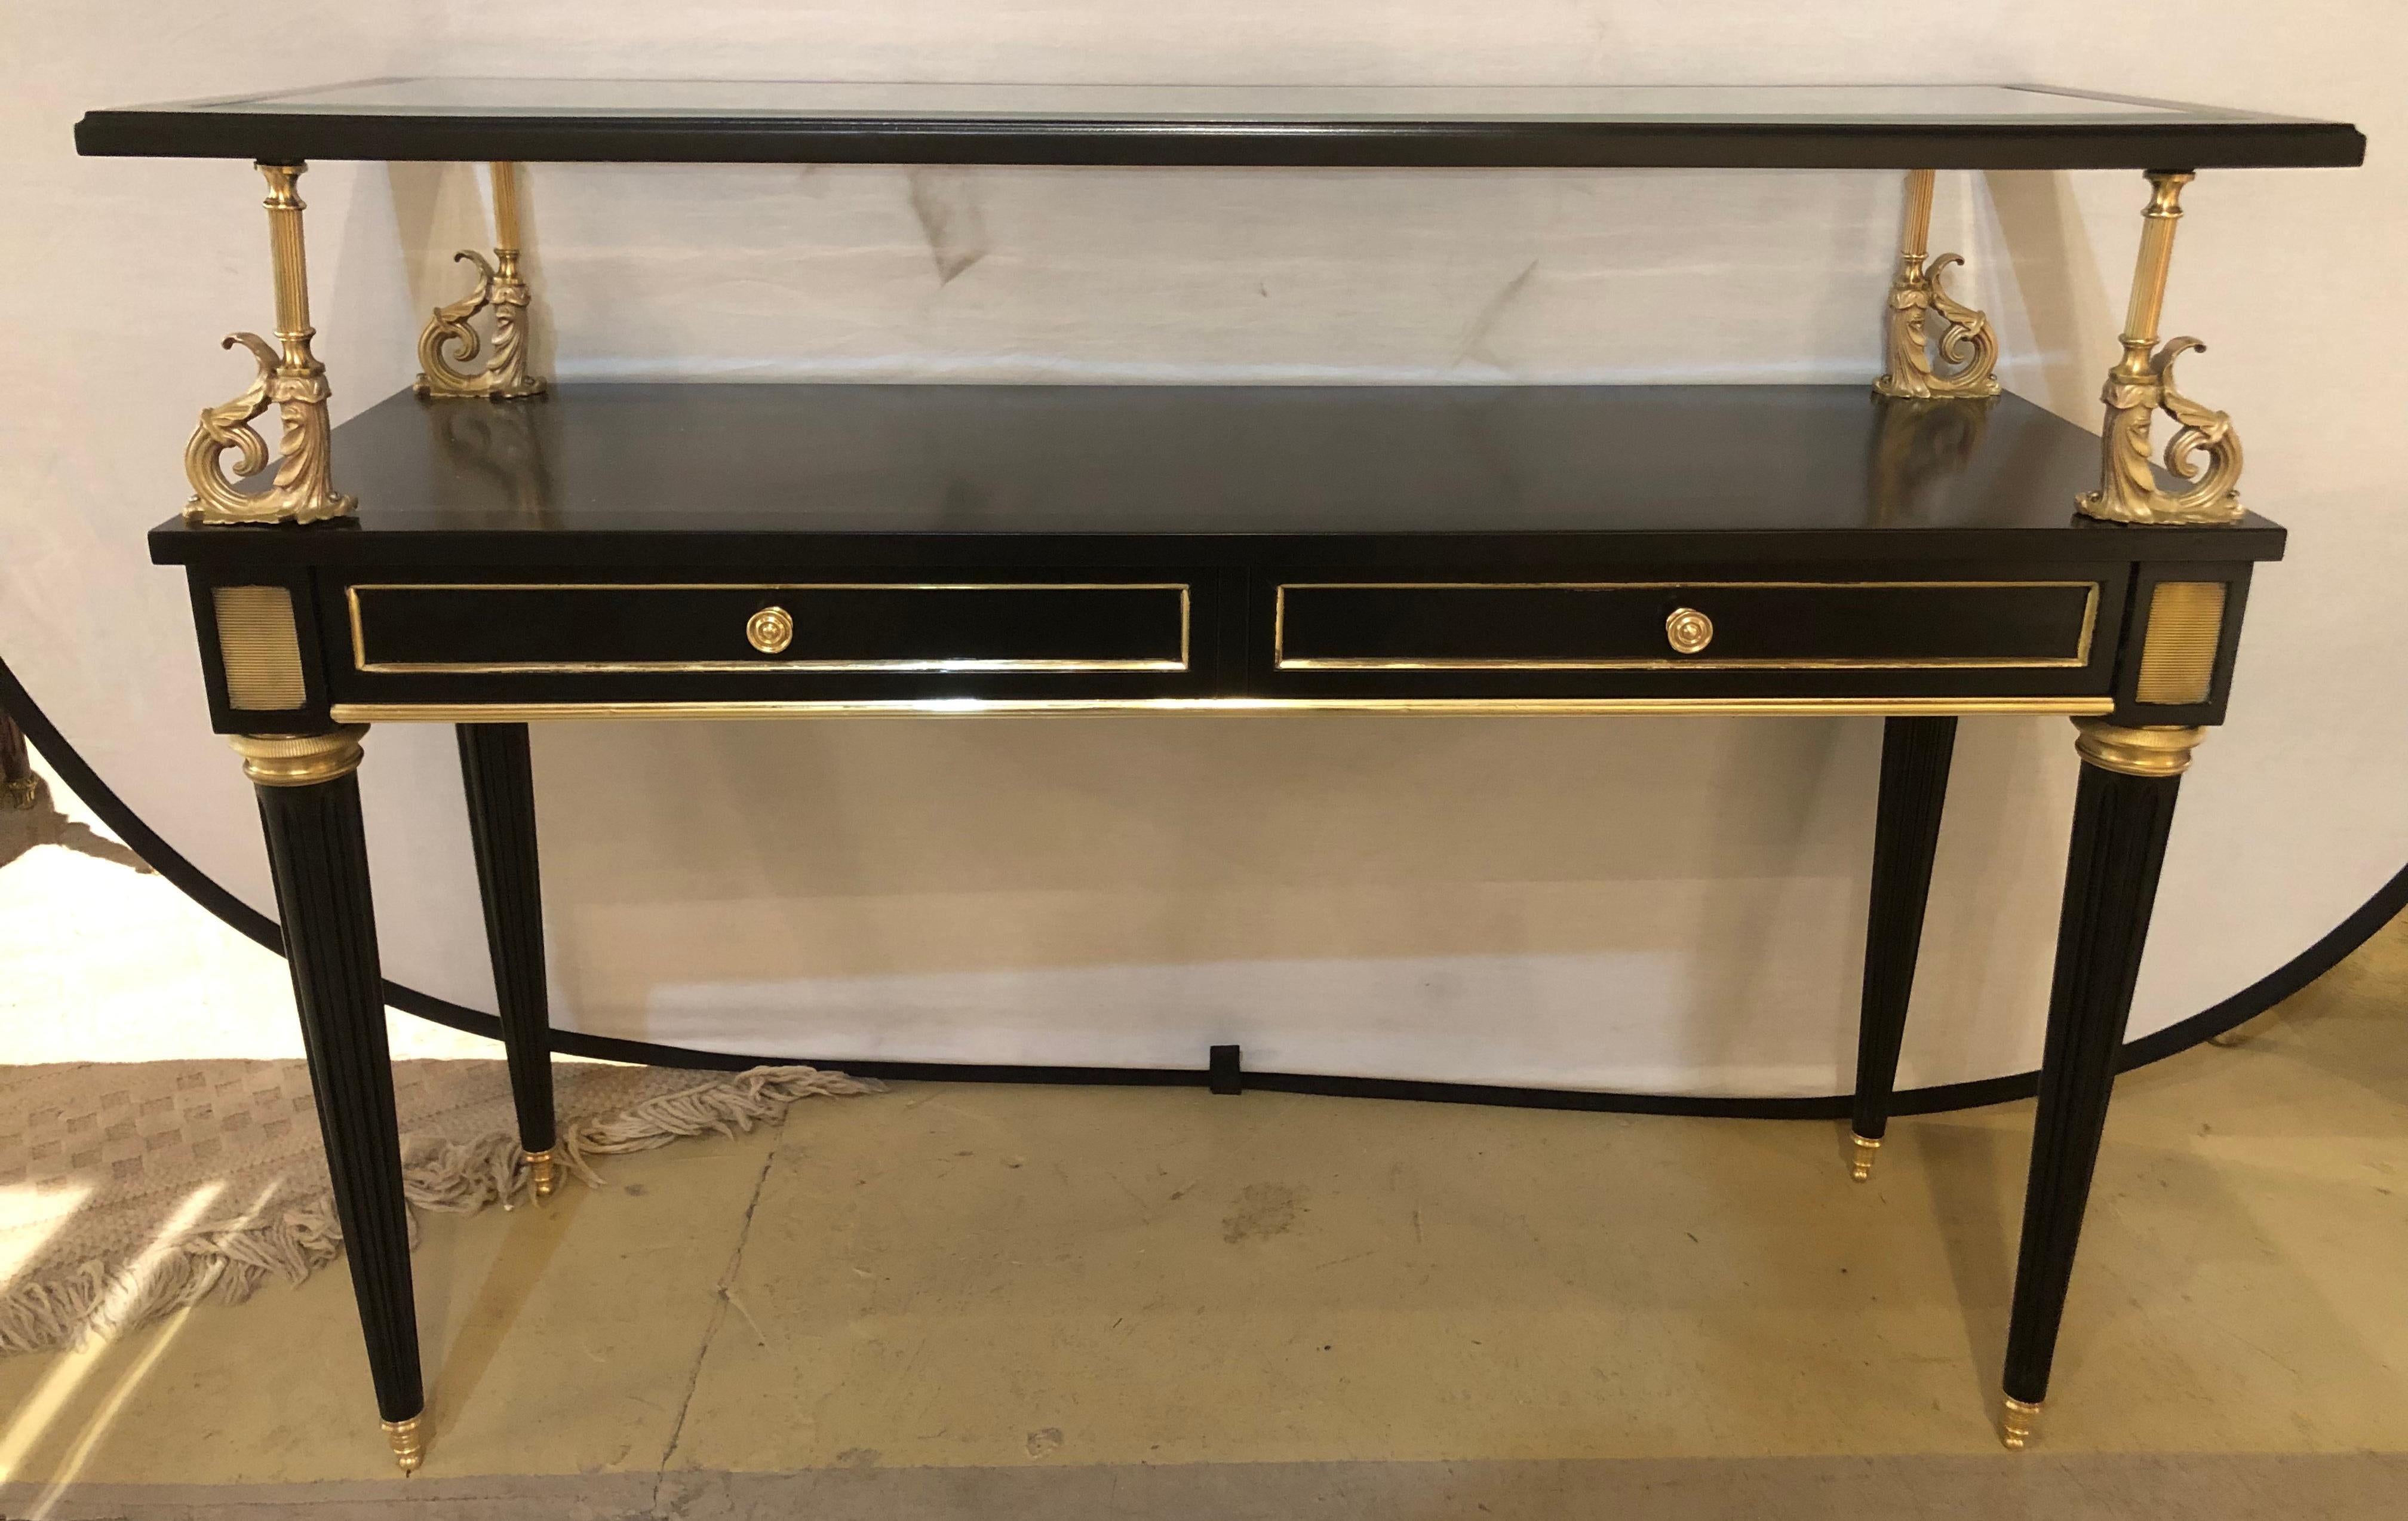 An ebony and bronze mounted Hollywood Regency serving cart or étagère. Server / Console table in the manner of Maison Jansen. The sleek and stylish case having bronze sabots leading to tapering reeded legs terminating in bronze circular capitals